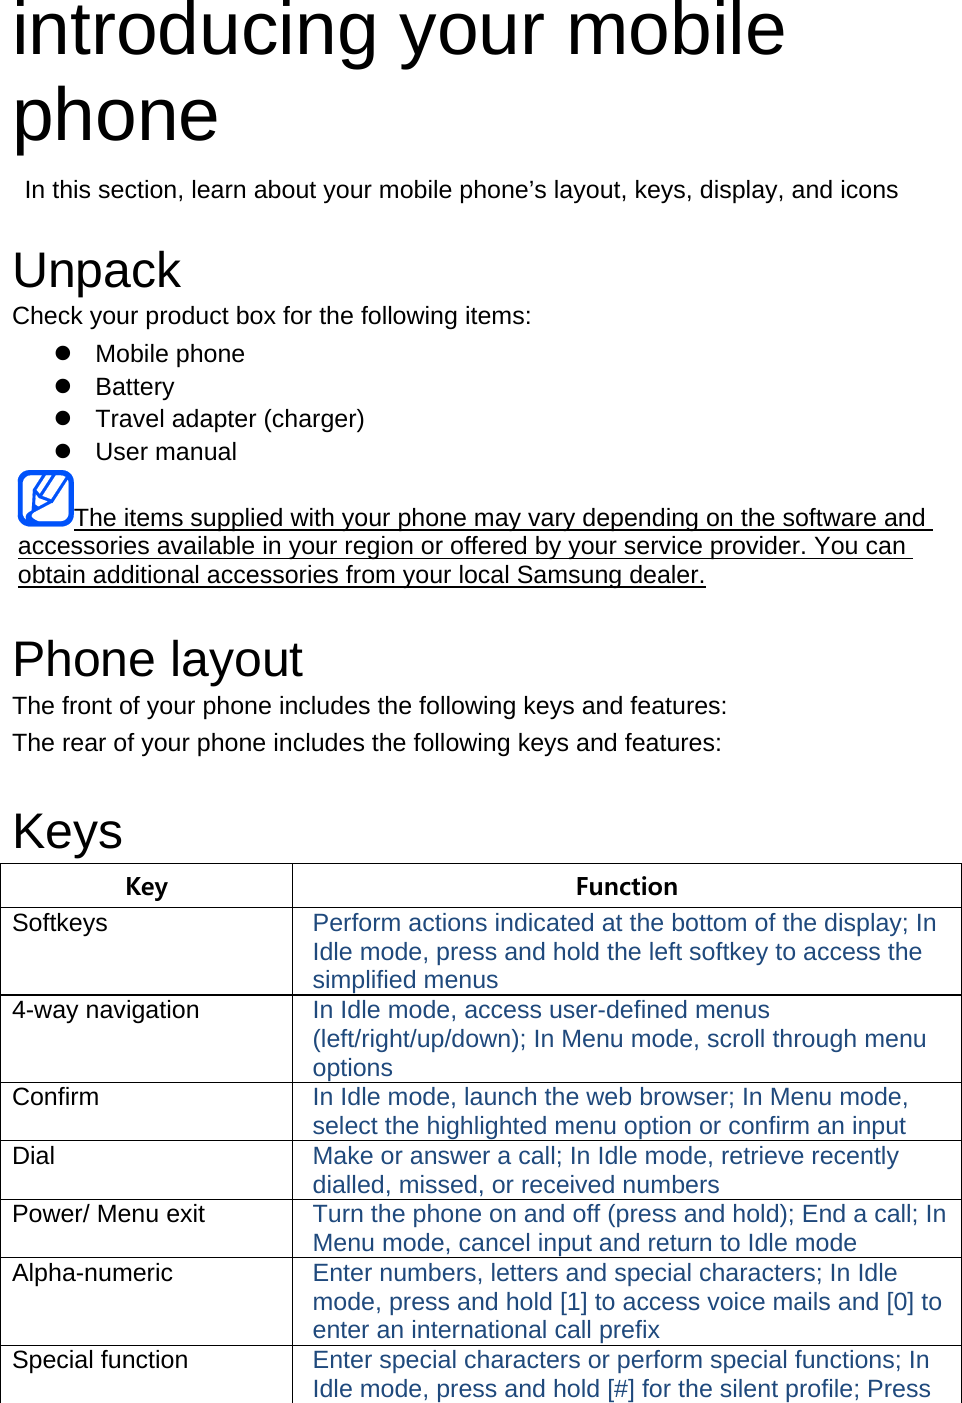 introducing your mobile phone   In this section, learn about your mobile phone’s layout, keys, display, and icons  Unpack Check your product box for the following items:  Mobile phone  Battery   Travel adapter (charger)  User manual The items supplied with your phone may vary depending on the software and accessories available in your region or offered by your service provider. You can obtain additional accessories from your local Samsung dealer.  Phone layout The front of your phone includes the following keys and features: The rear of your phone includes the following keys and features:  Keys Key  Function Softkeys  Perform actions indicated at the bottom of the display; In Idle mode, press and hold the left softkey to access the simplified menus 4-way navigation  In Idle mode, access user-defined menus (left/right/up/down); In Menu mode, scroll through menu options Confirm  In Idle mode, launch the web browser; In Menu mode, select the highlighted menu option or confirm an input Dial  Make or answer a call; In Idle mode, retrieve recently dialled, missed, or received numbers Power/ Menu exit  Turn the phone on and off (press and hold); End a call; In Menu mode, cancel input and return to Idle mode Alpha-numeric  Enter numbers, letters and special characters; In Idle mode, press and hold [1] to access voice mails and [0] to enter an international call prefix Special function  Enter special characters or perform special functions; In Idle mode, press and hold [#] for the silent profile; Press 